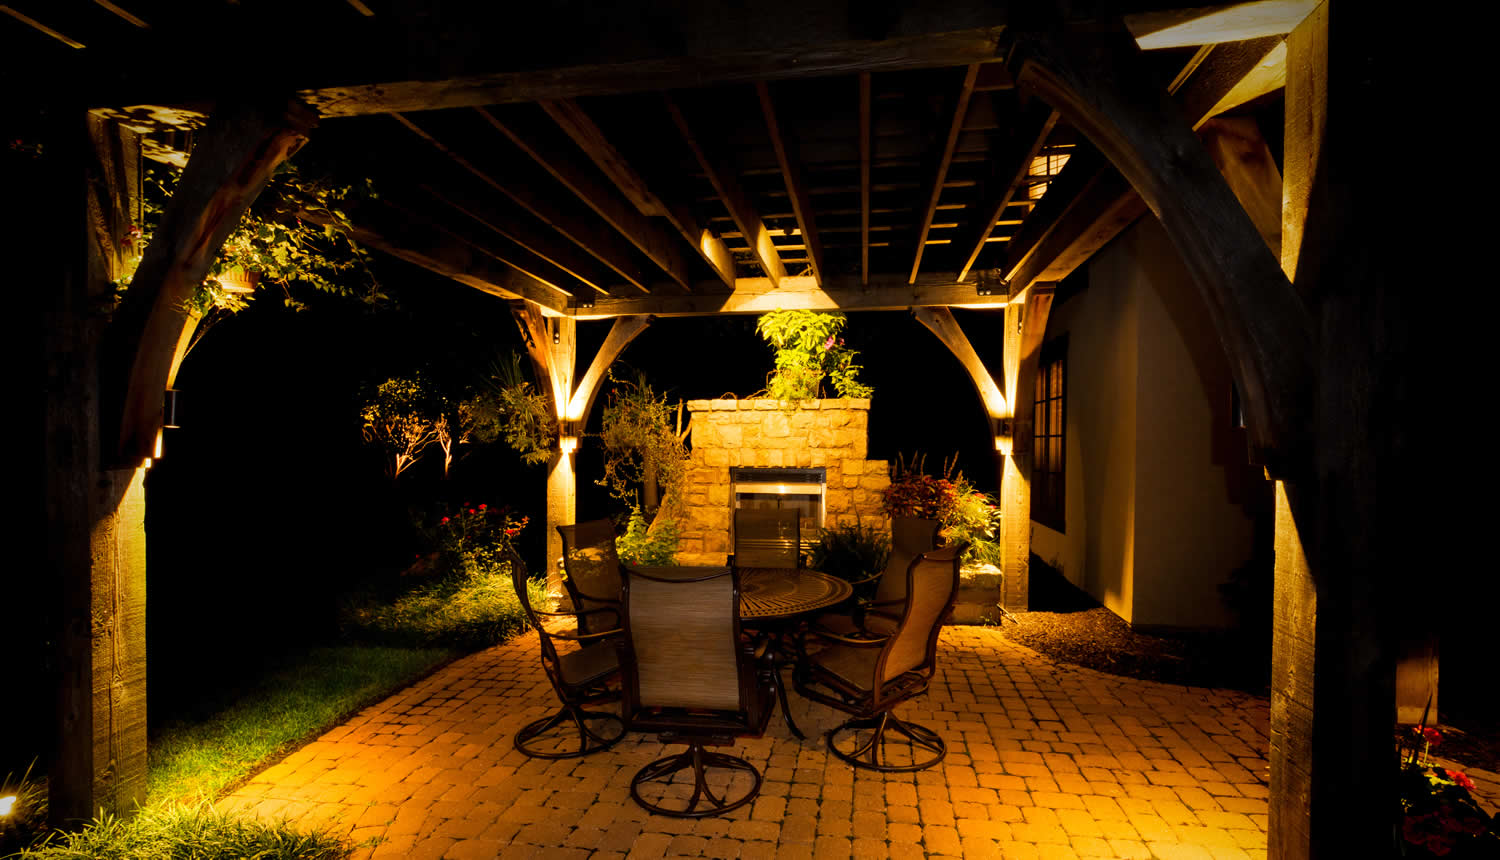 warm colored outdoor lighting attracts fewer bugs